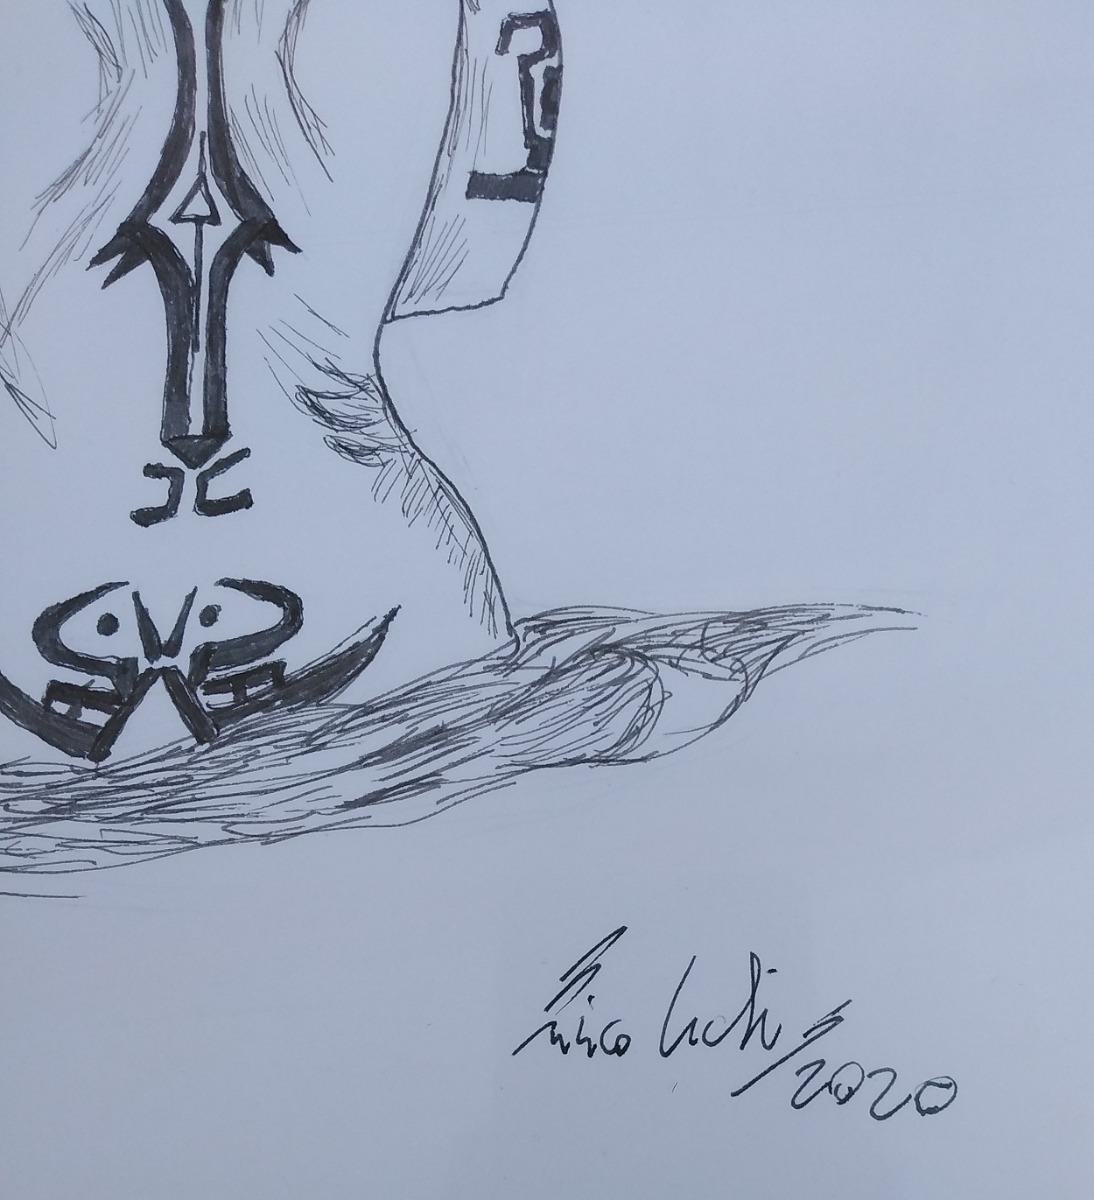 Tattoo on the Back  is an original China ink drawing realized by the Italian artist  Enrico Josef Cucchi  in 2020.

Hand-signed and dated on the lower right. Perfect conditions.